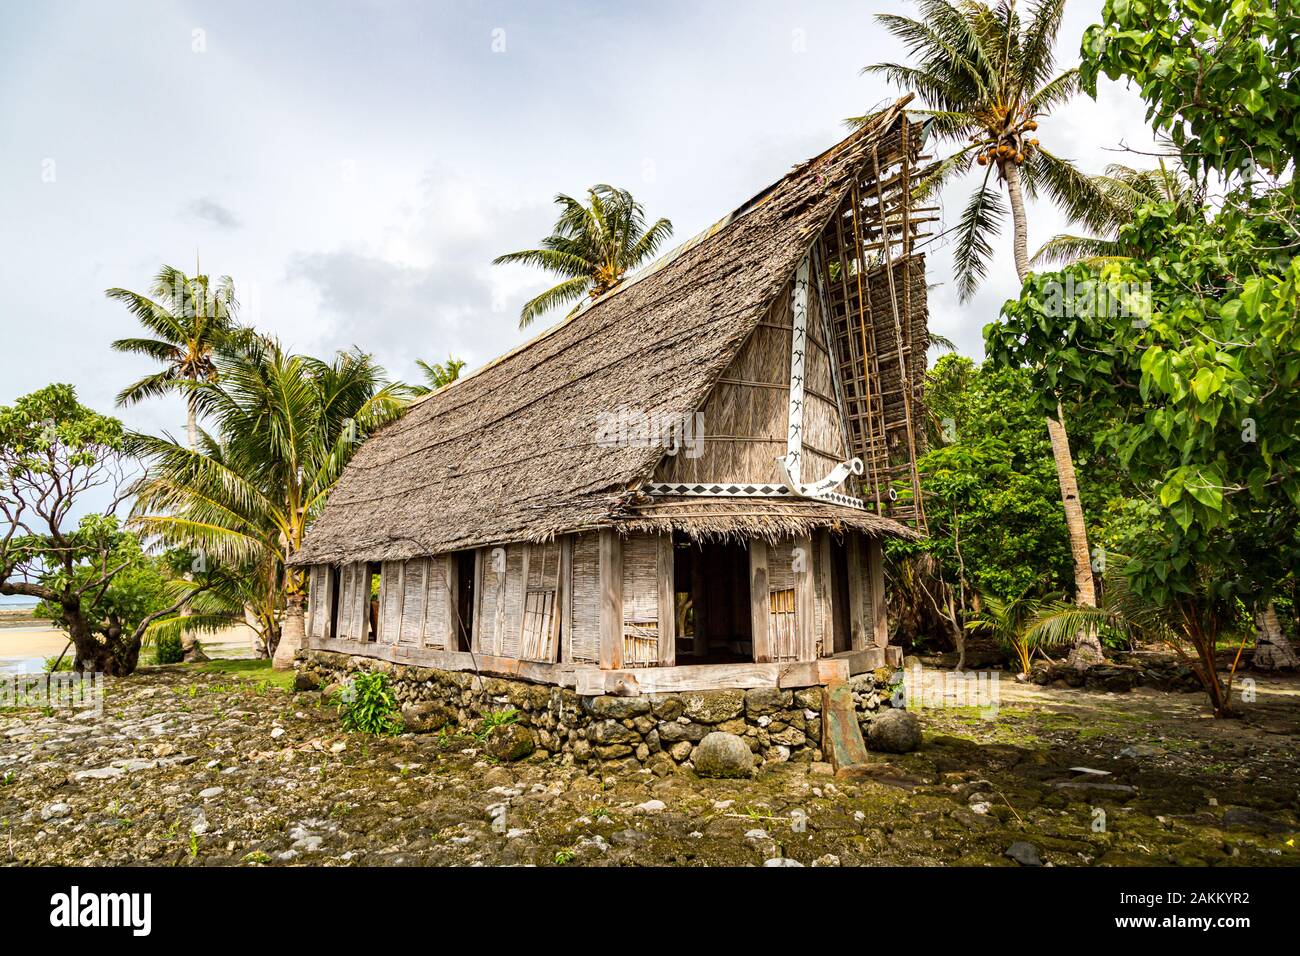 Old traditional thatched yapese men's meeting house faluw or fale, on an elevated limestone platform foundation. Shore of South Pacific ocean. Yap isl Stock Photo